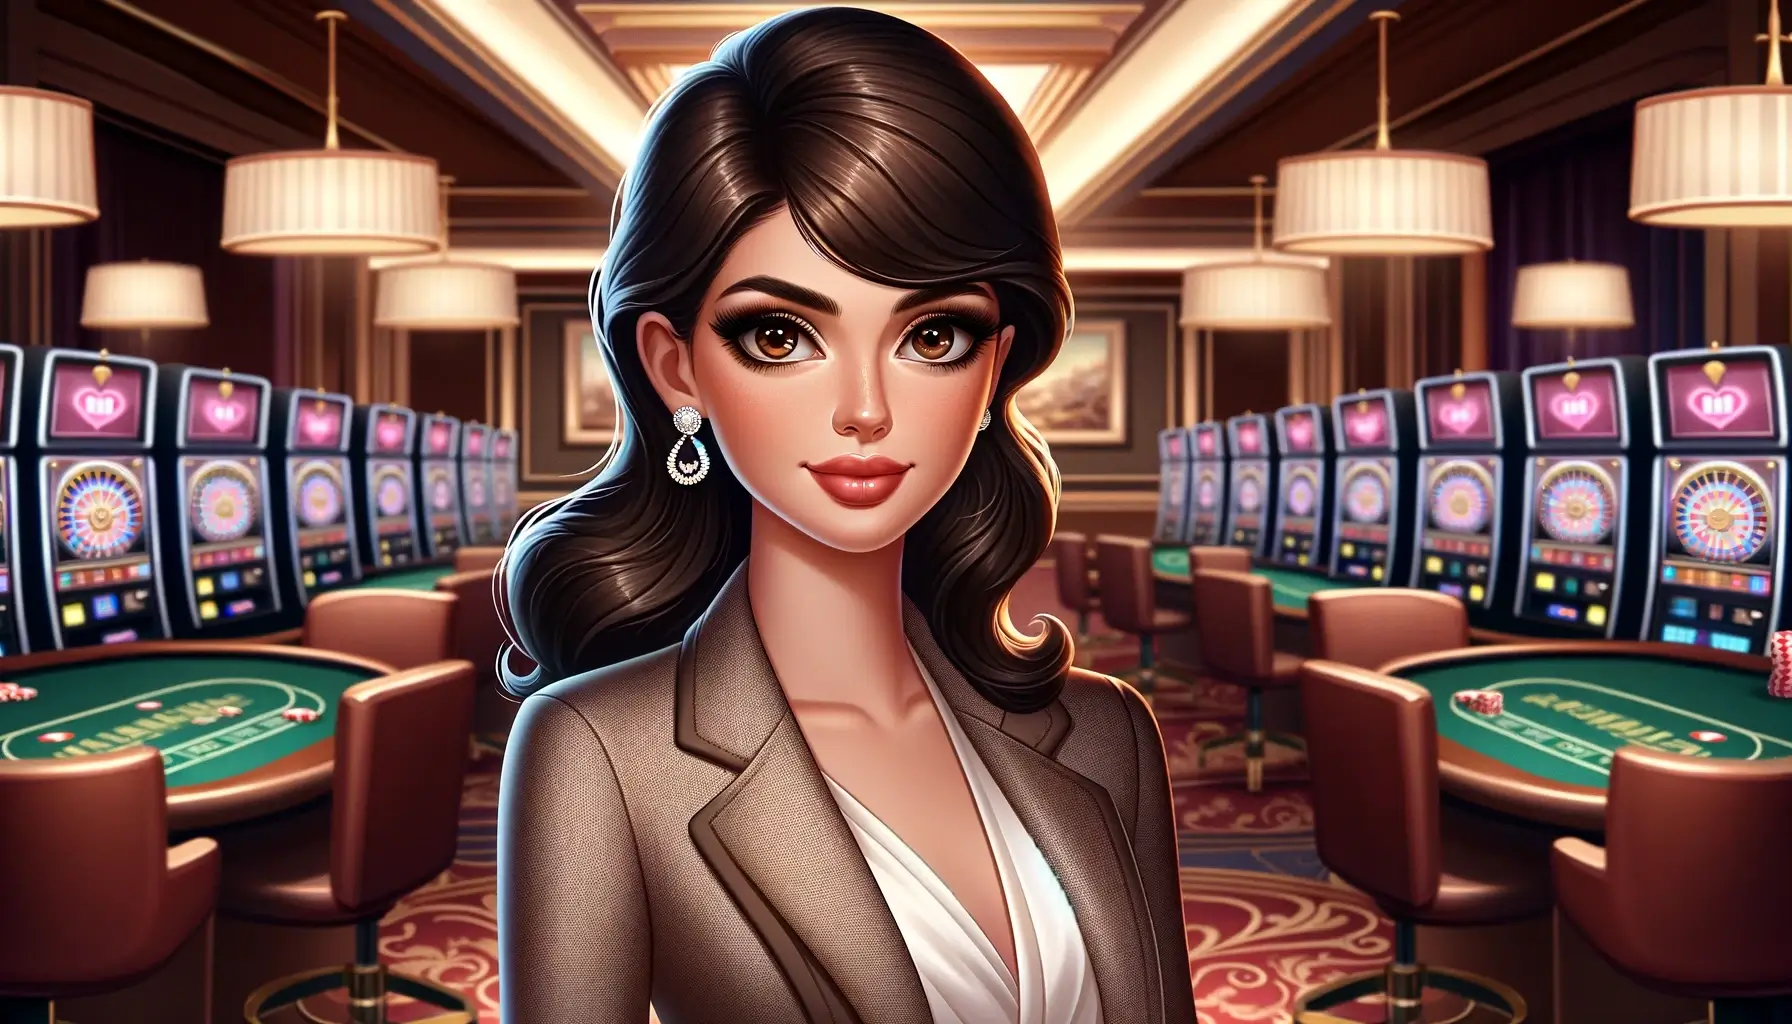 Evaluate Free Spins SMS ThePhoneCasino